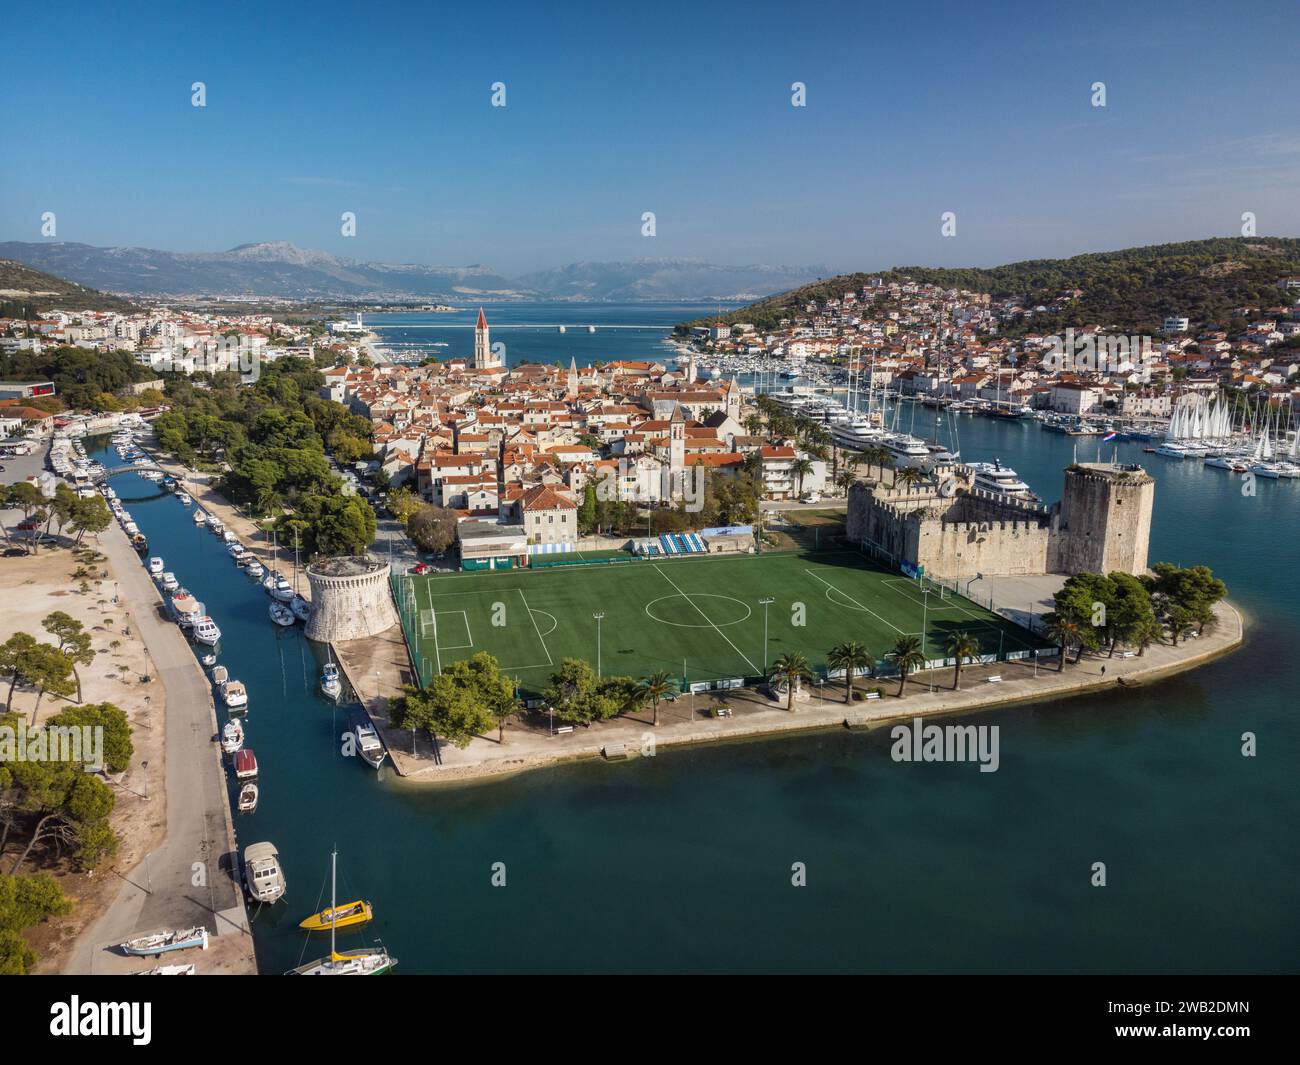 Aerial of football pitch and Trogir old town with surrounding harbor Stock Photo